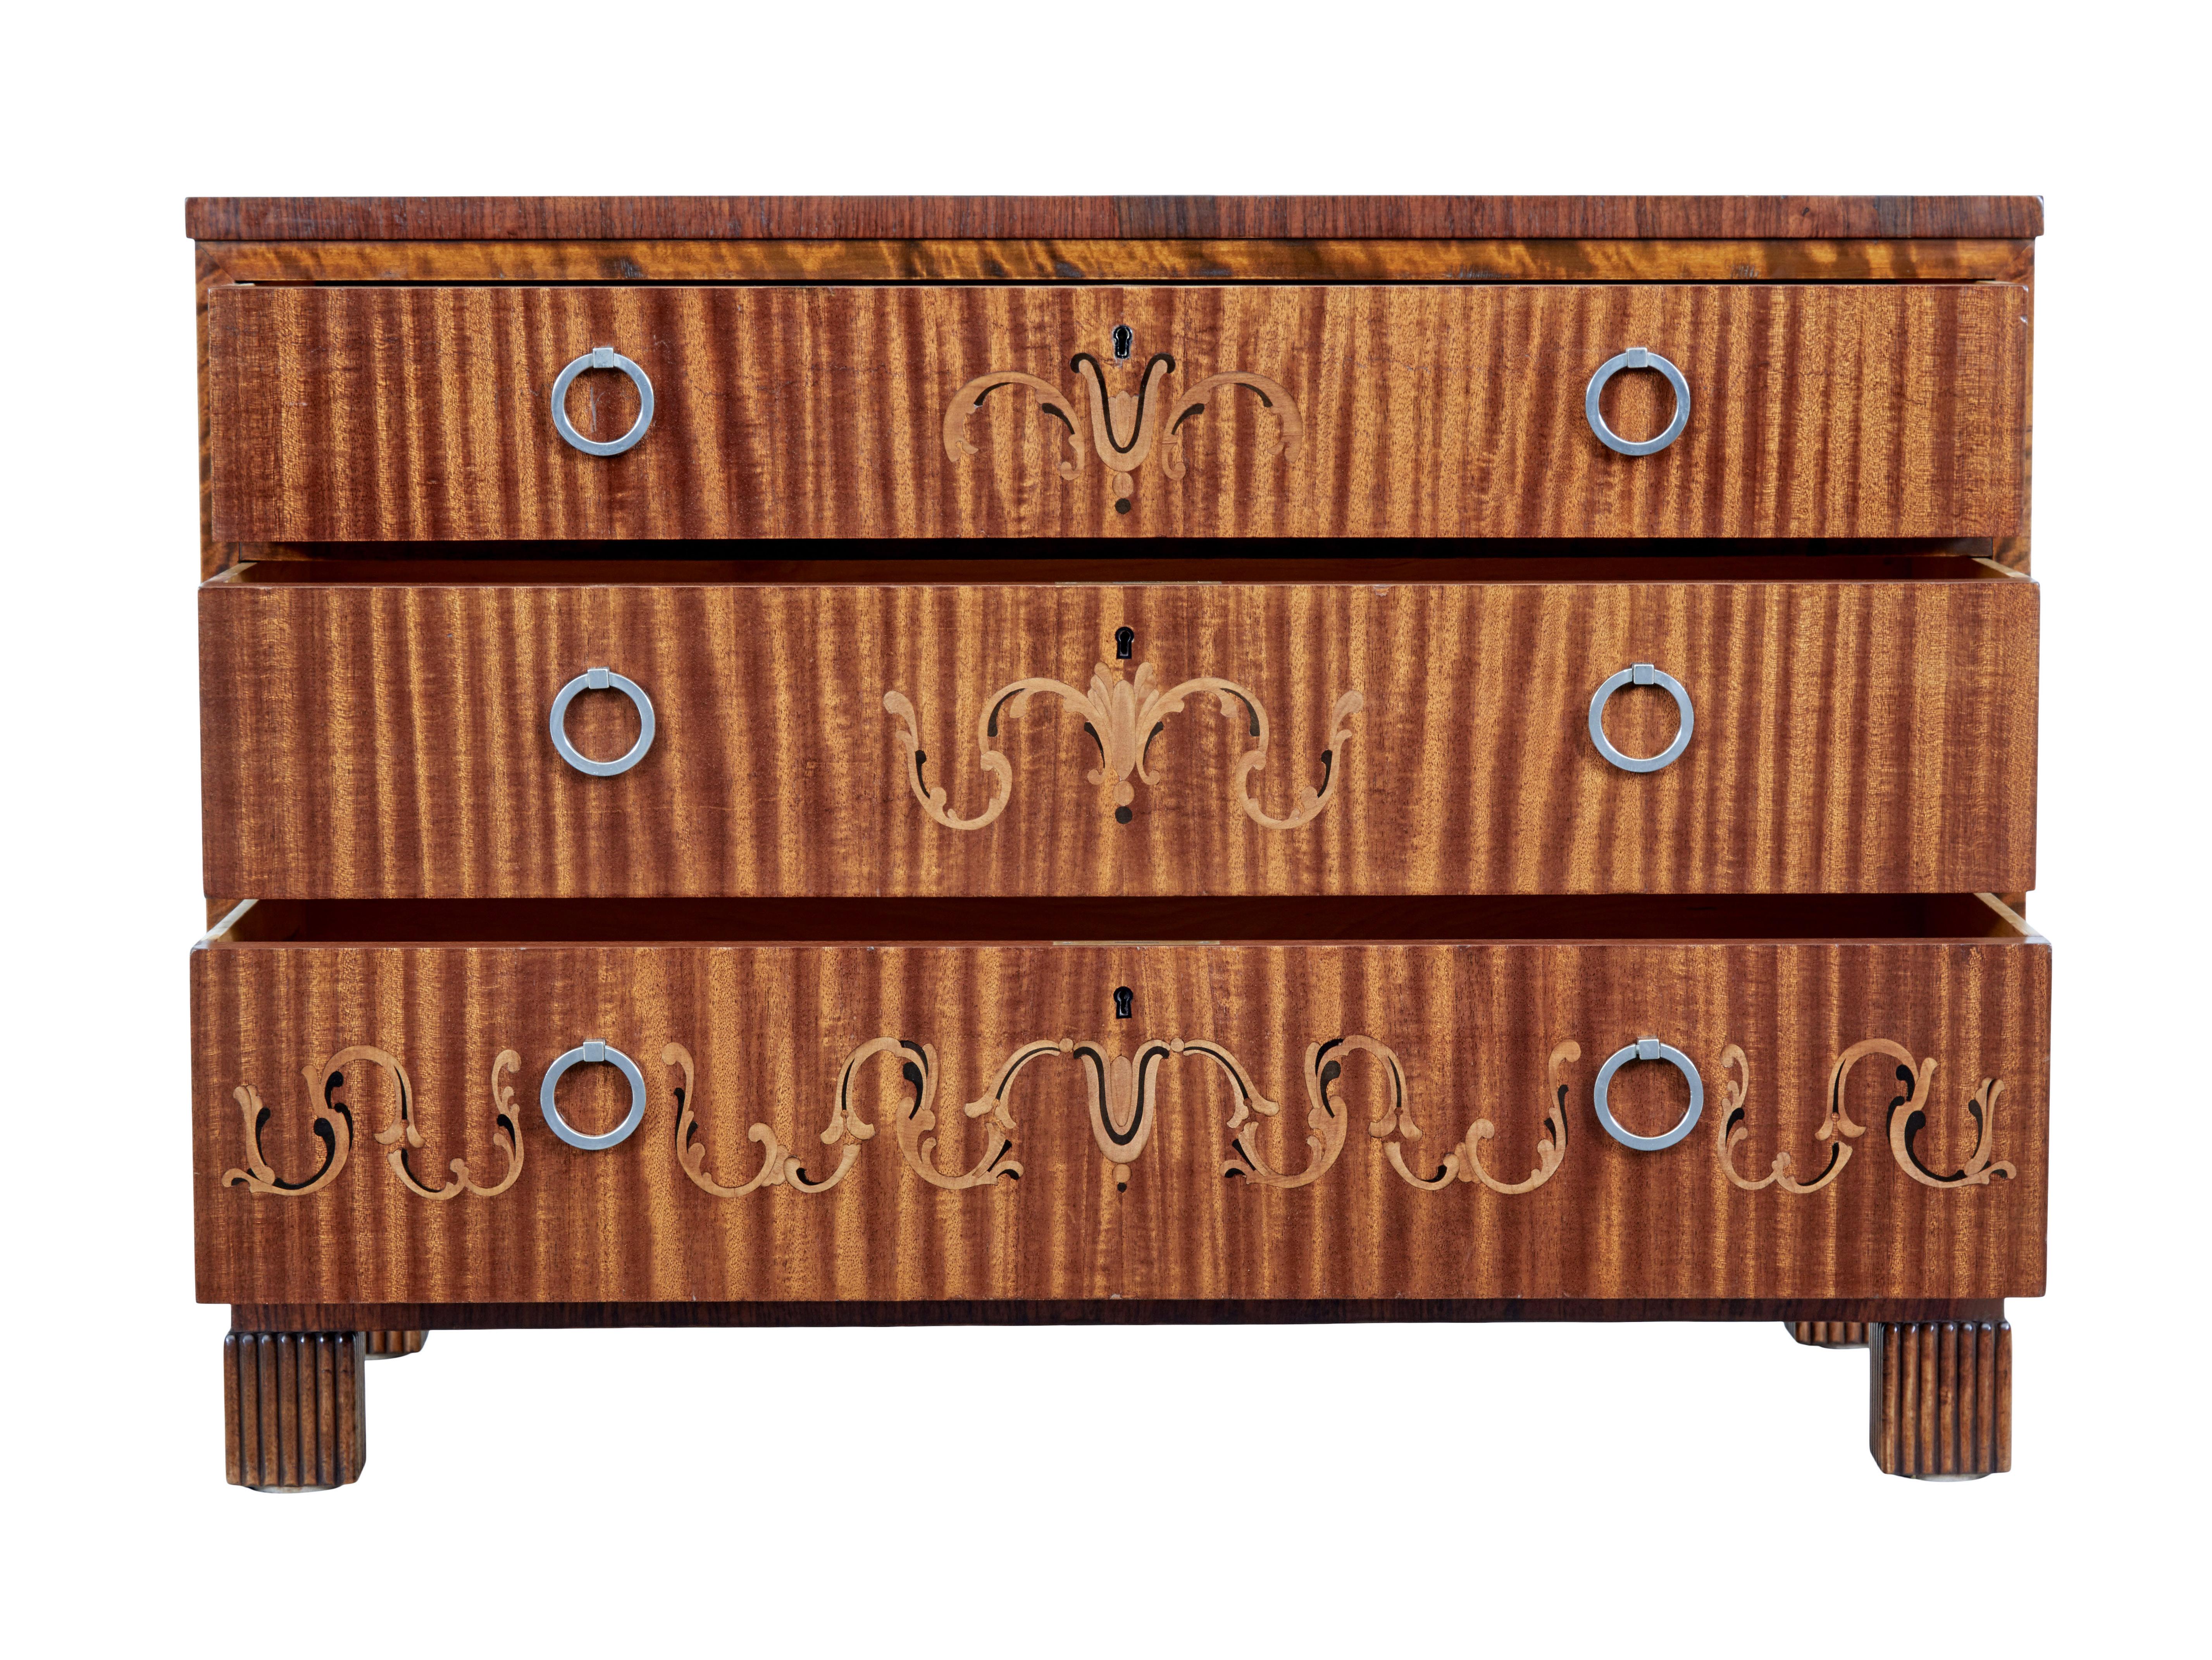 Art Deco 20th century art deco inlaid chest of drawers For Sale